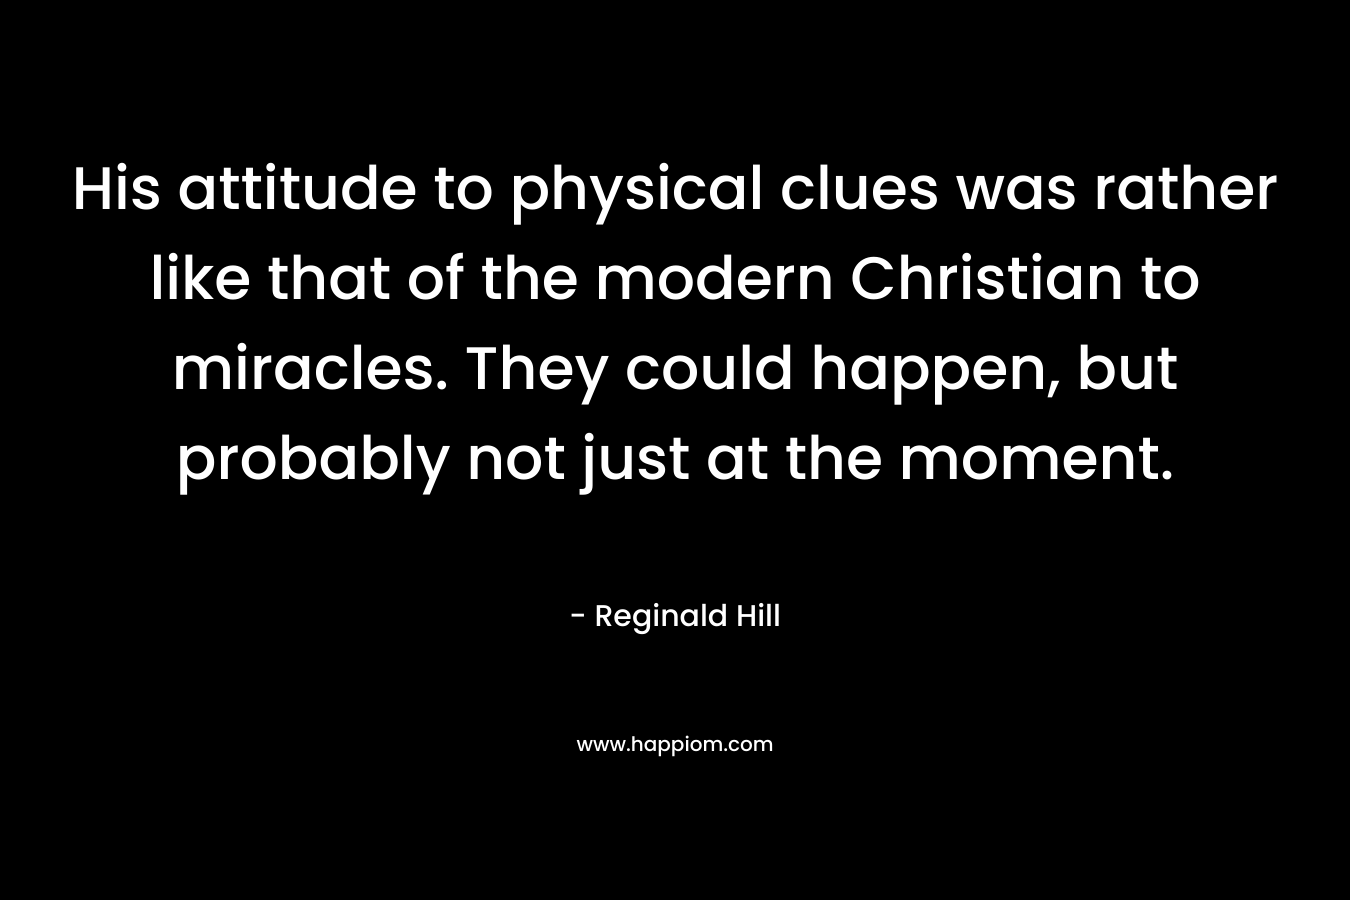 His attitude to physical clues was rather like that of the modern Christian to miracles. They could happen, but probably not just at the moment.